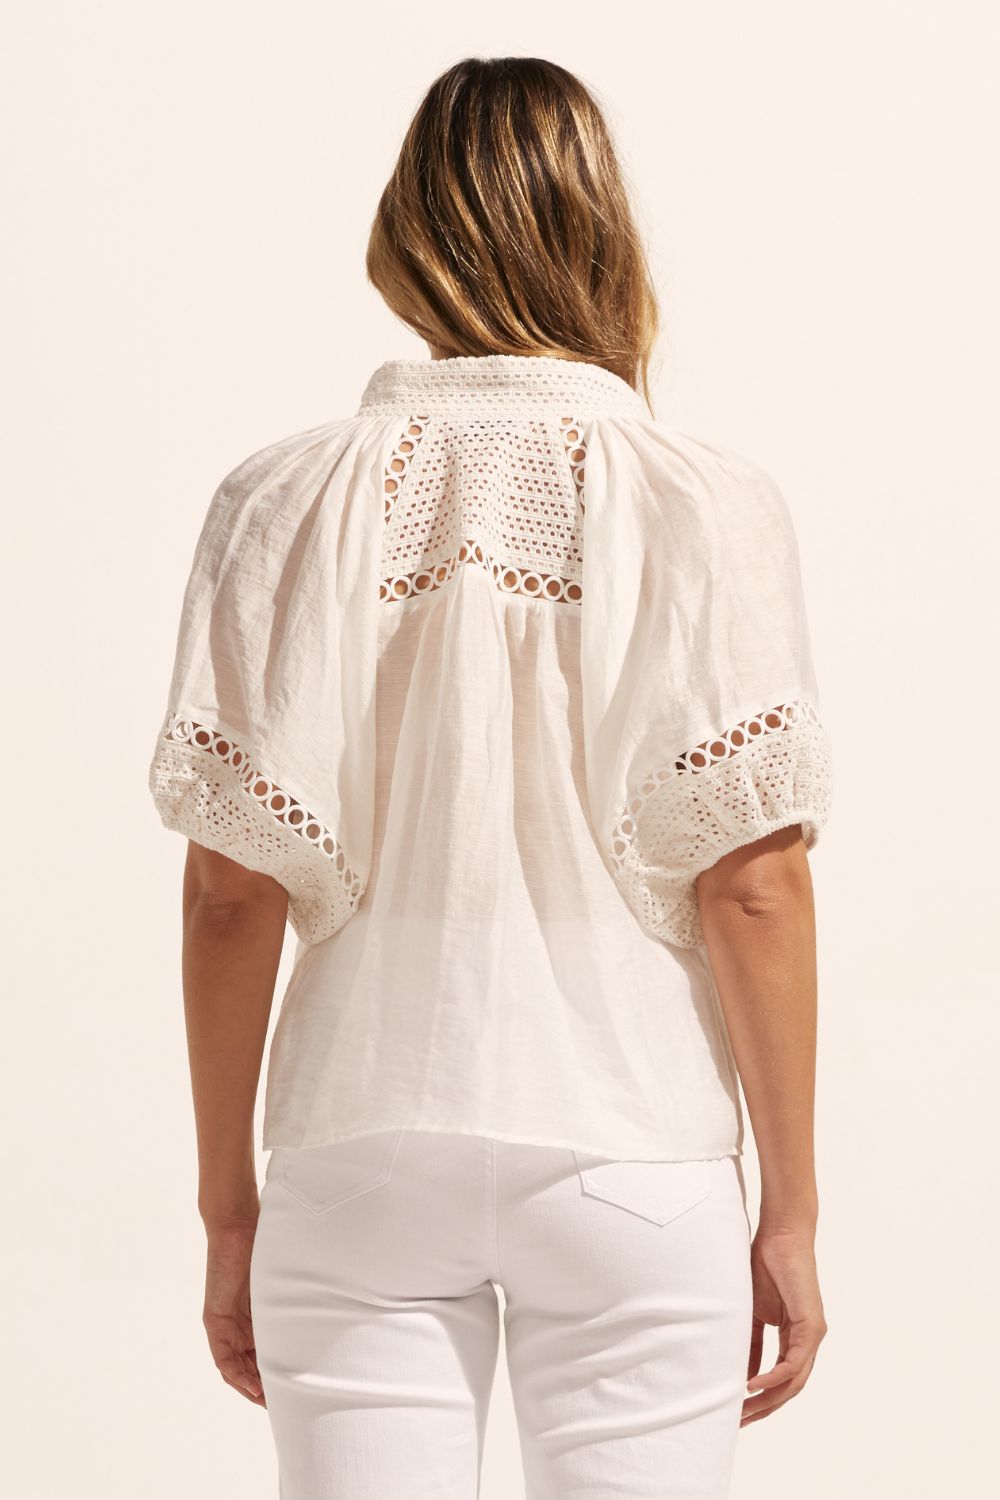 white, top, high neck, mid-length sleeve, covered buttons, circular lace detailing, back image